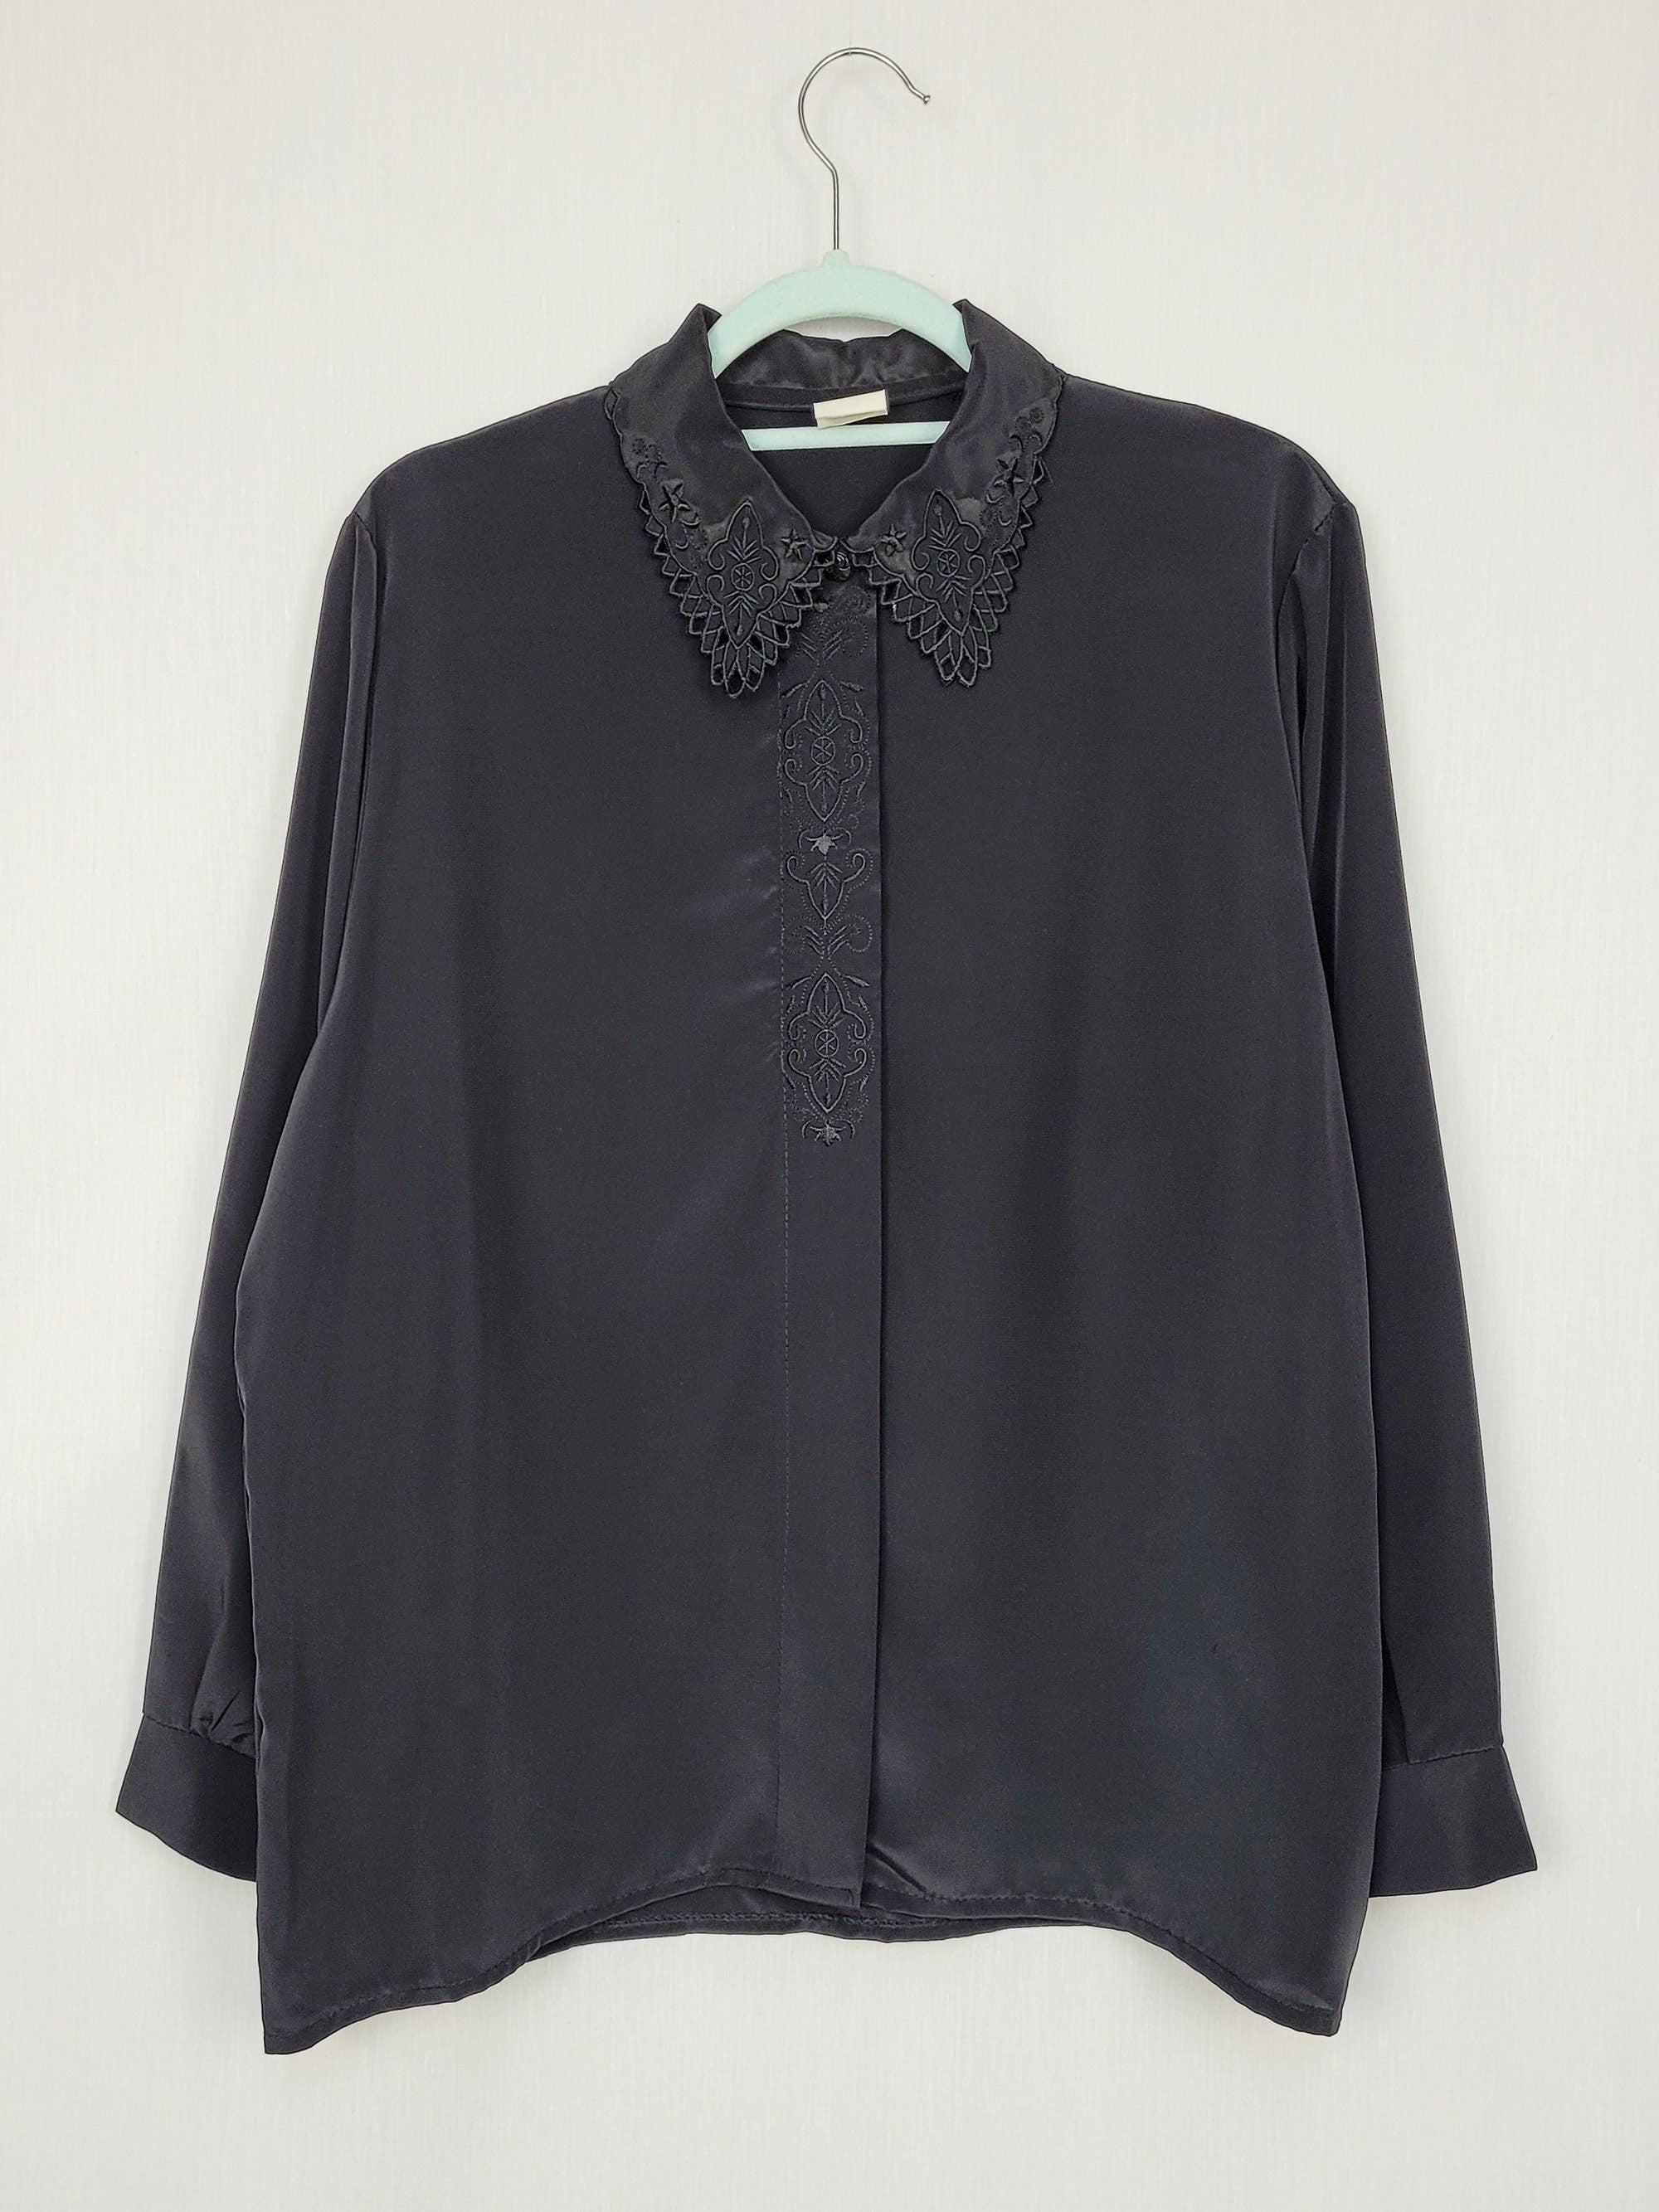 Vintage 80s black silky lace collar smart casual blouse top